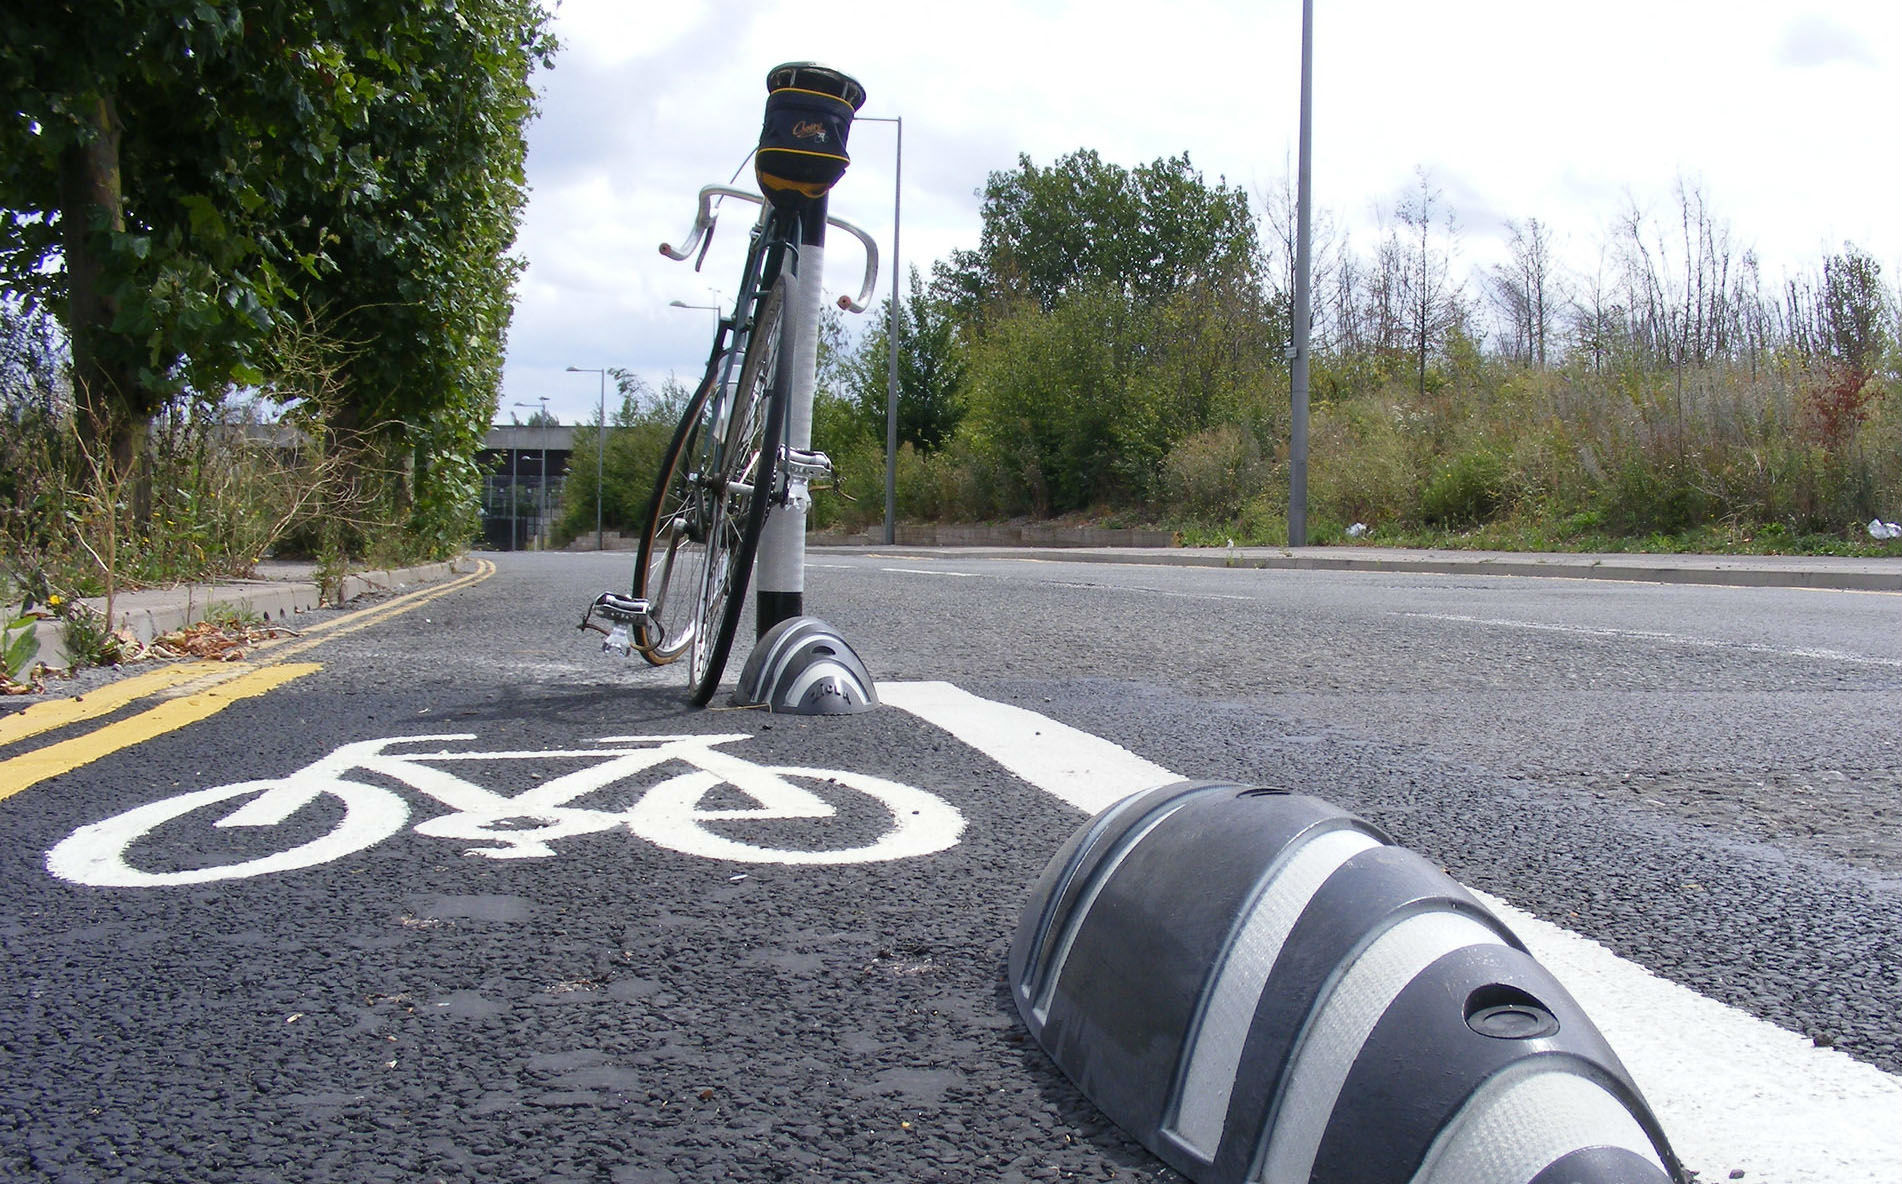 Cycle lane humps could be fatal for motorcyclists says MAG